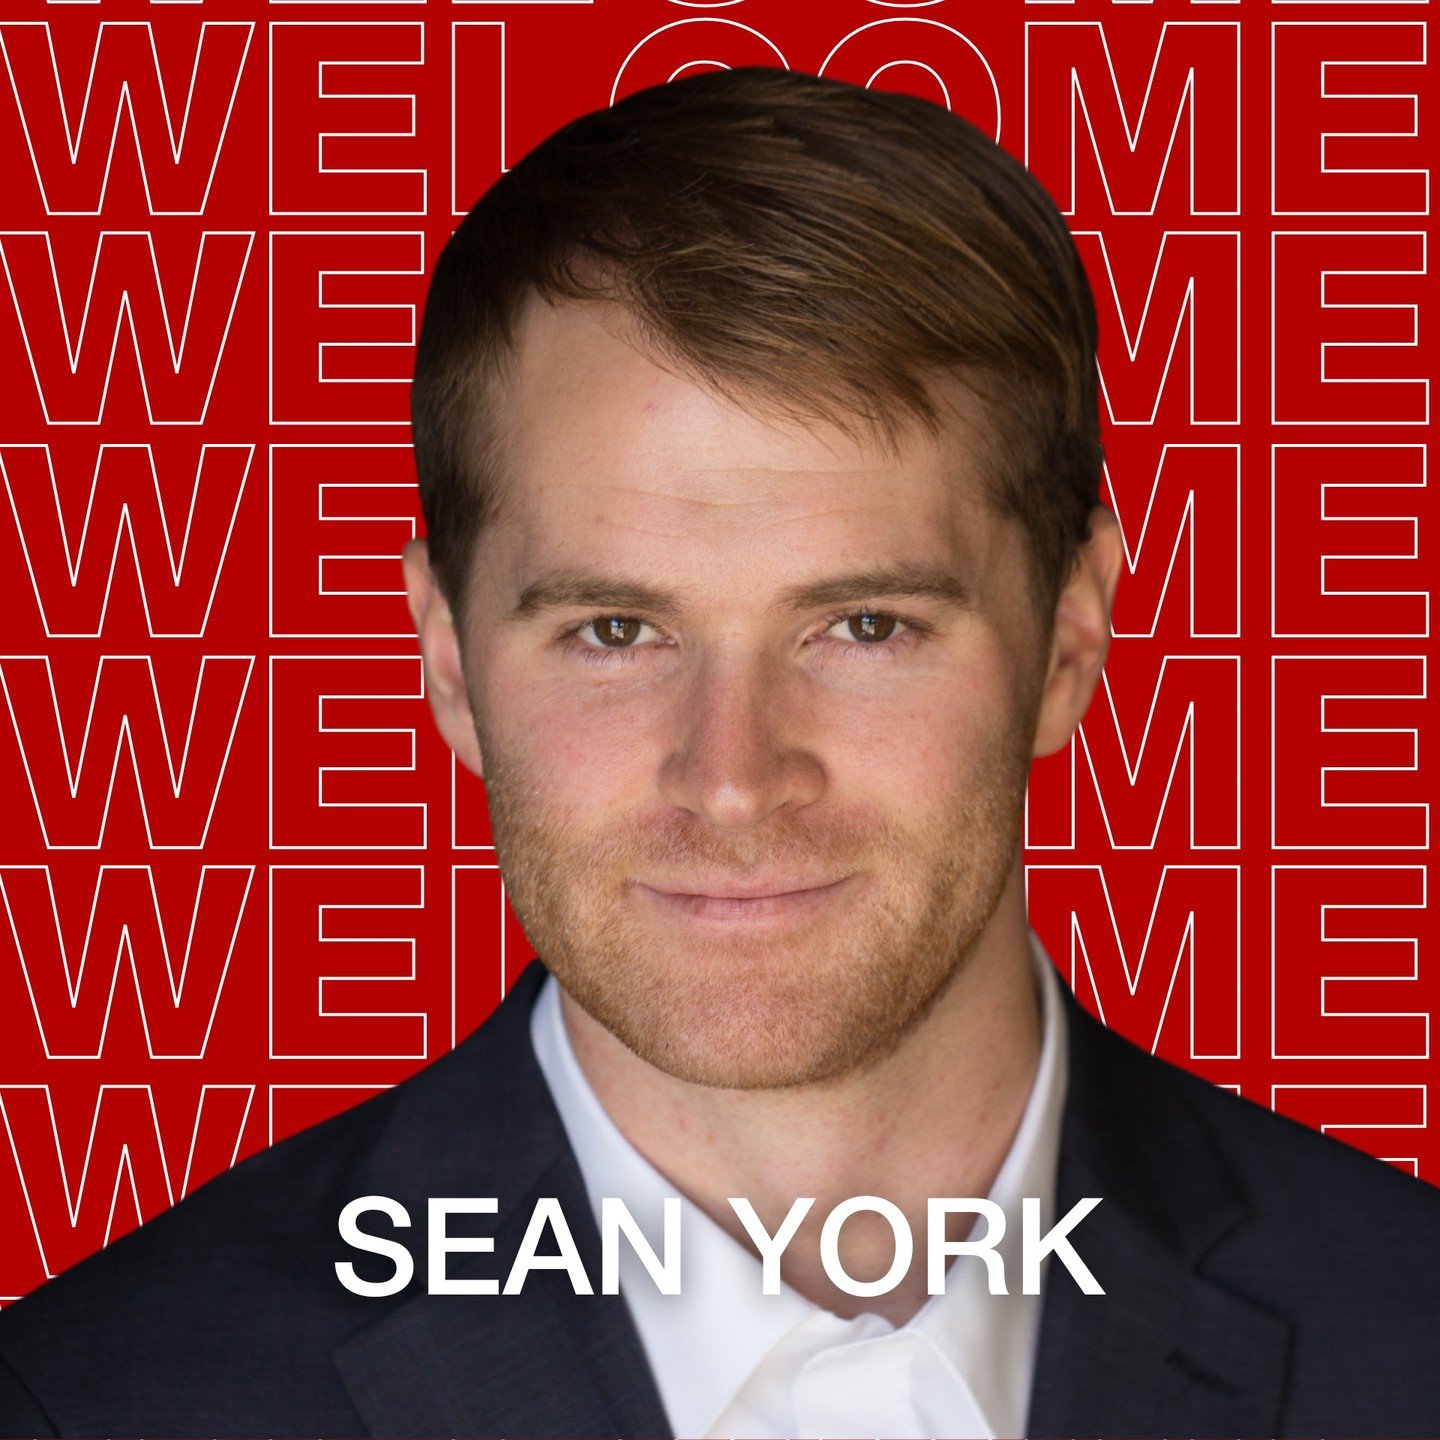 Please help us welcome @seanyorkrealtor to Keller Williams Pasadena Realty. We are excited for new beginnings with your kw real estate career. #whereentrepreneursthrive #kellerwilliams #pasadena #realtor 
If you are a non-Keller Williams Agent, open 